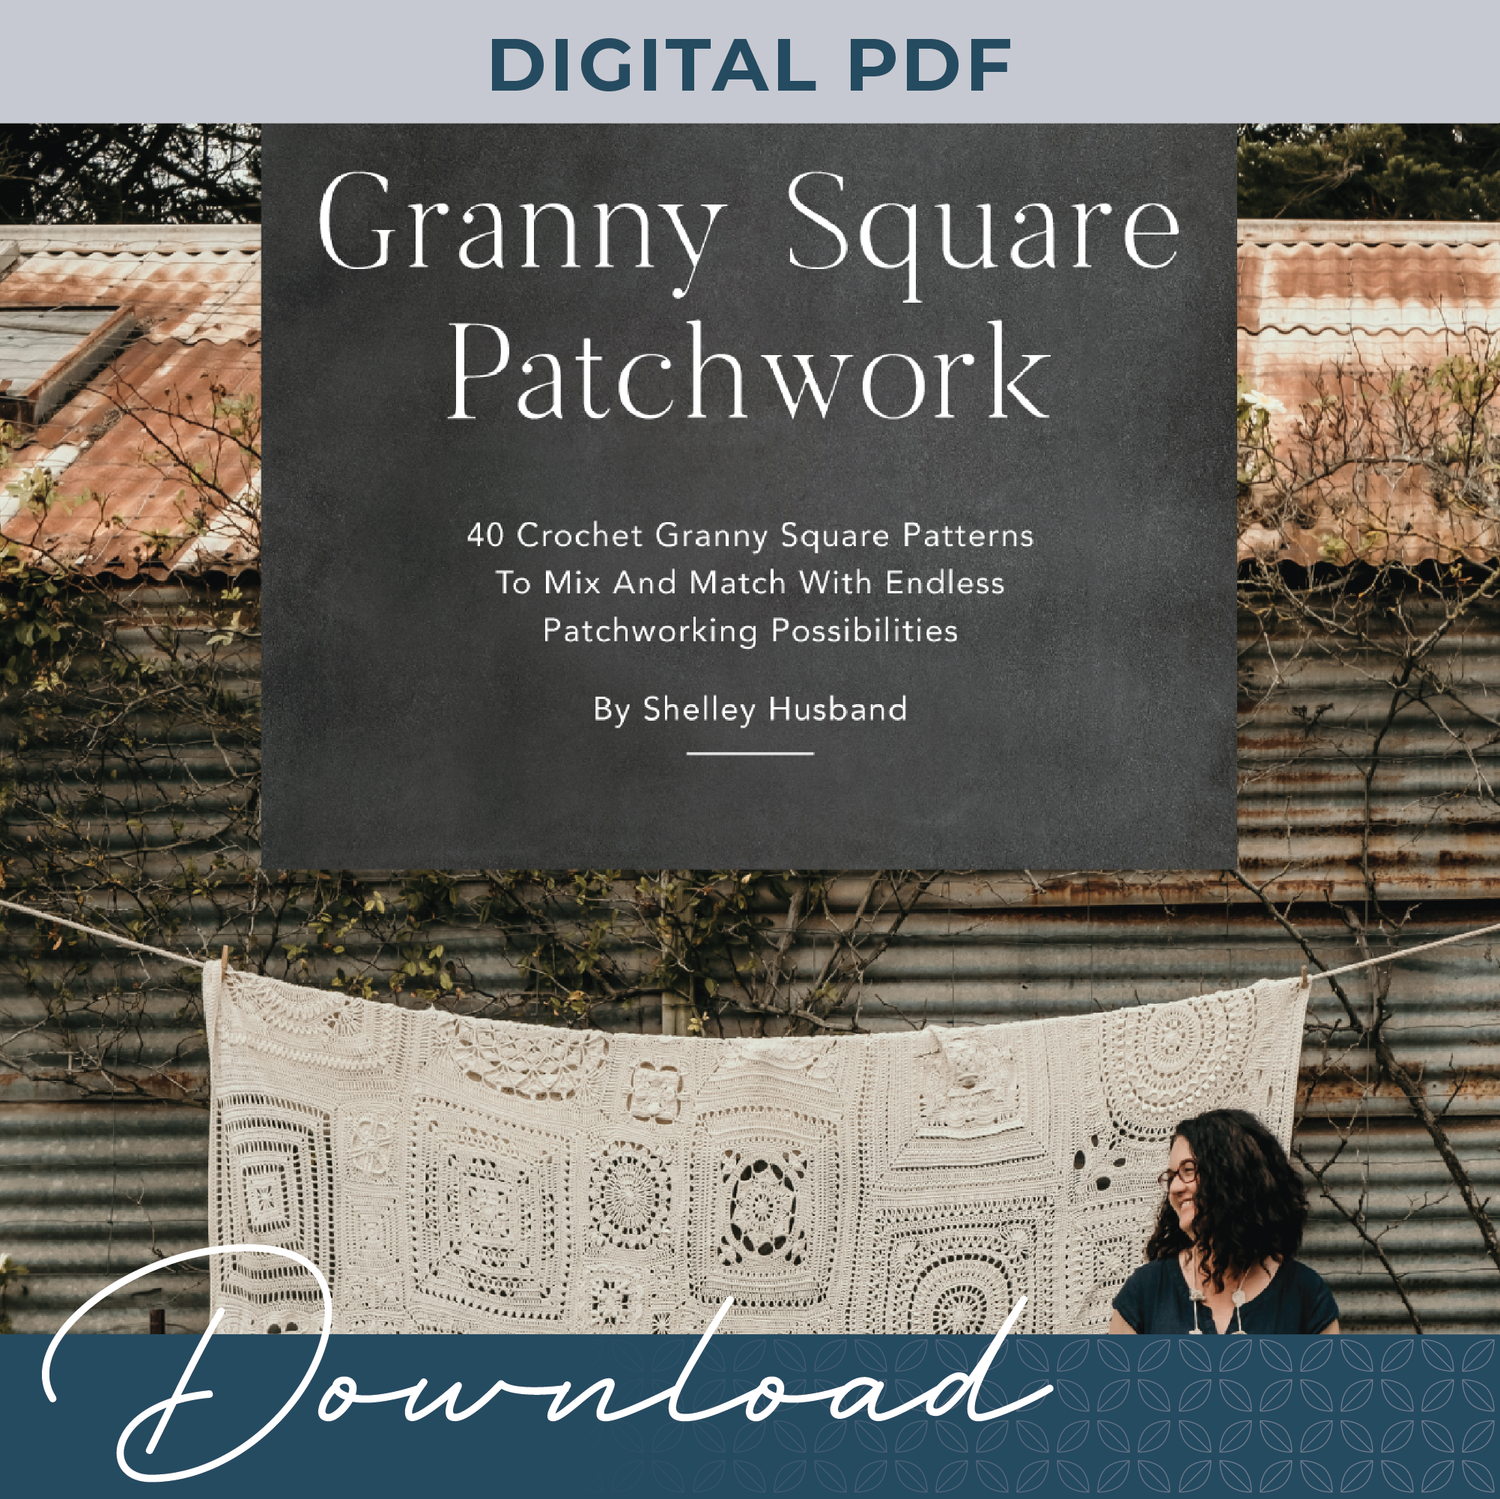 Granny Square Patchwork Digital Edition by Shelley Husband